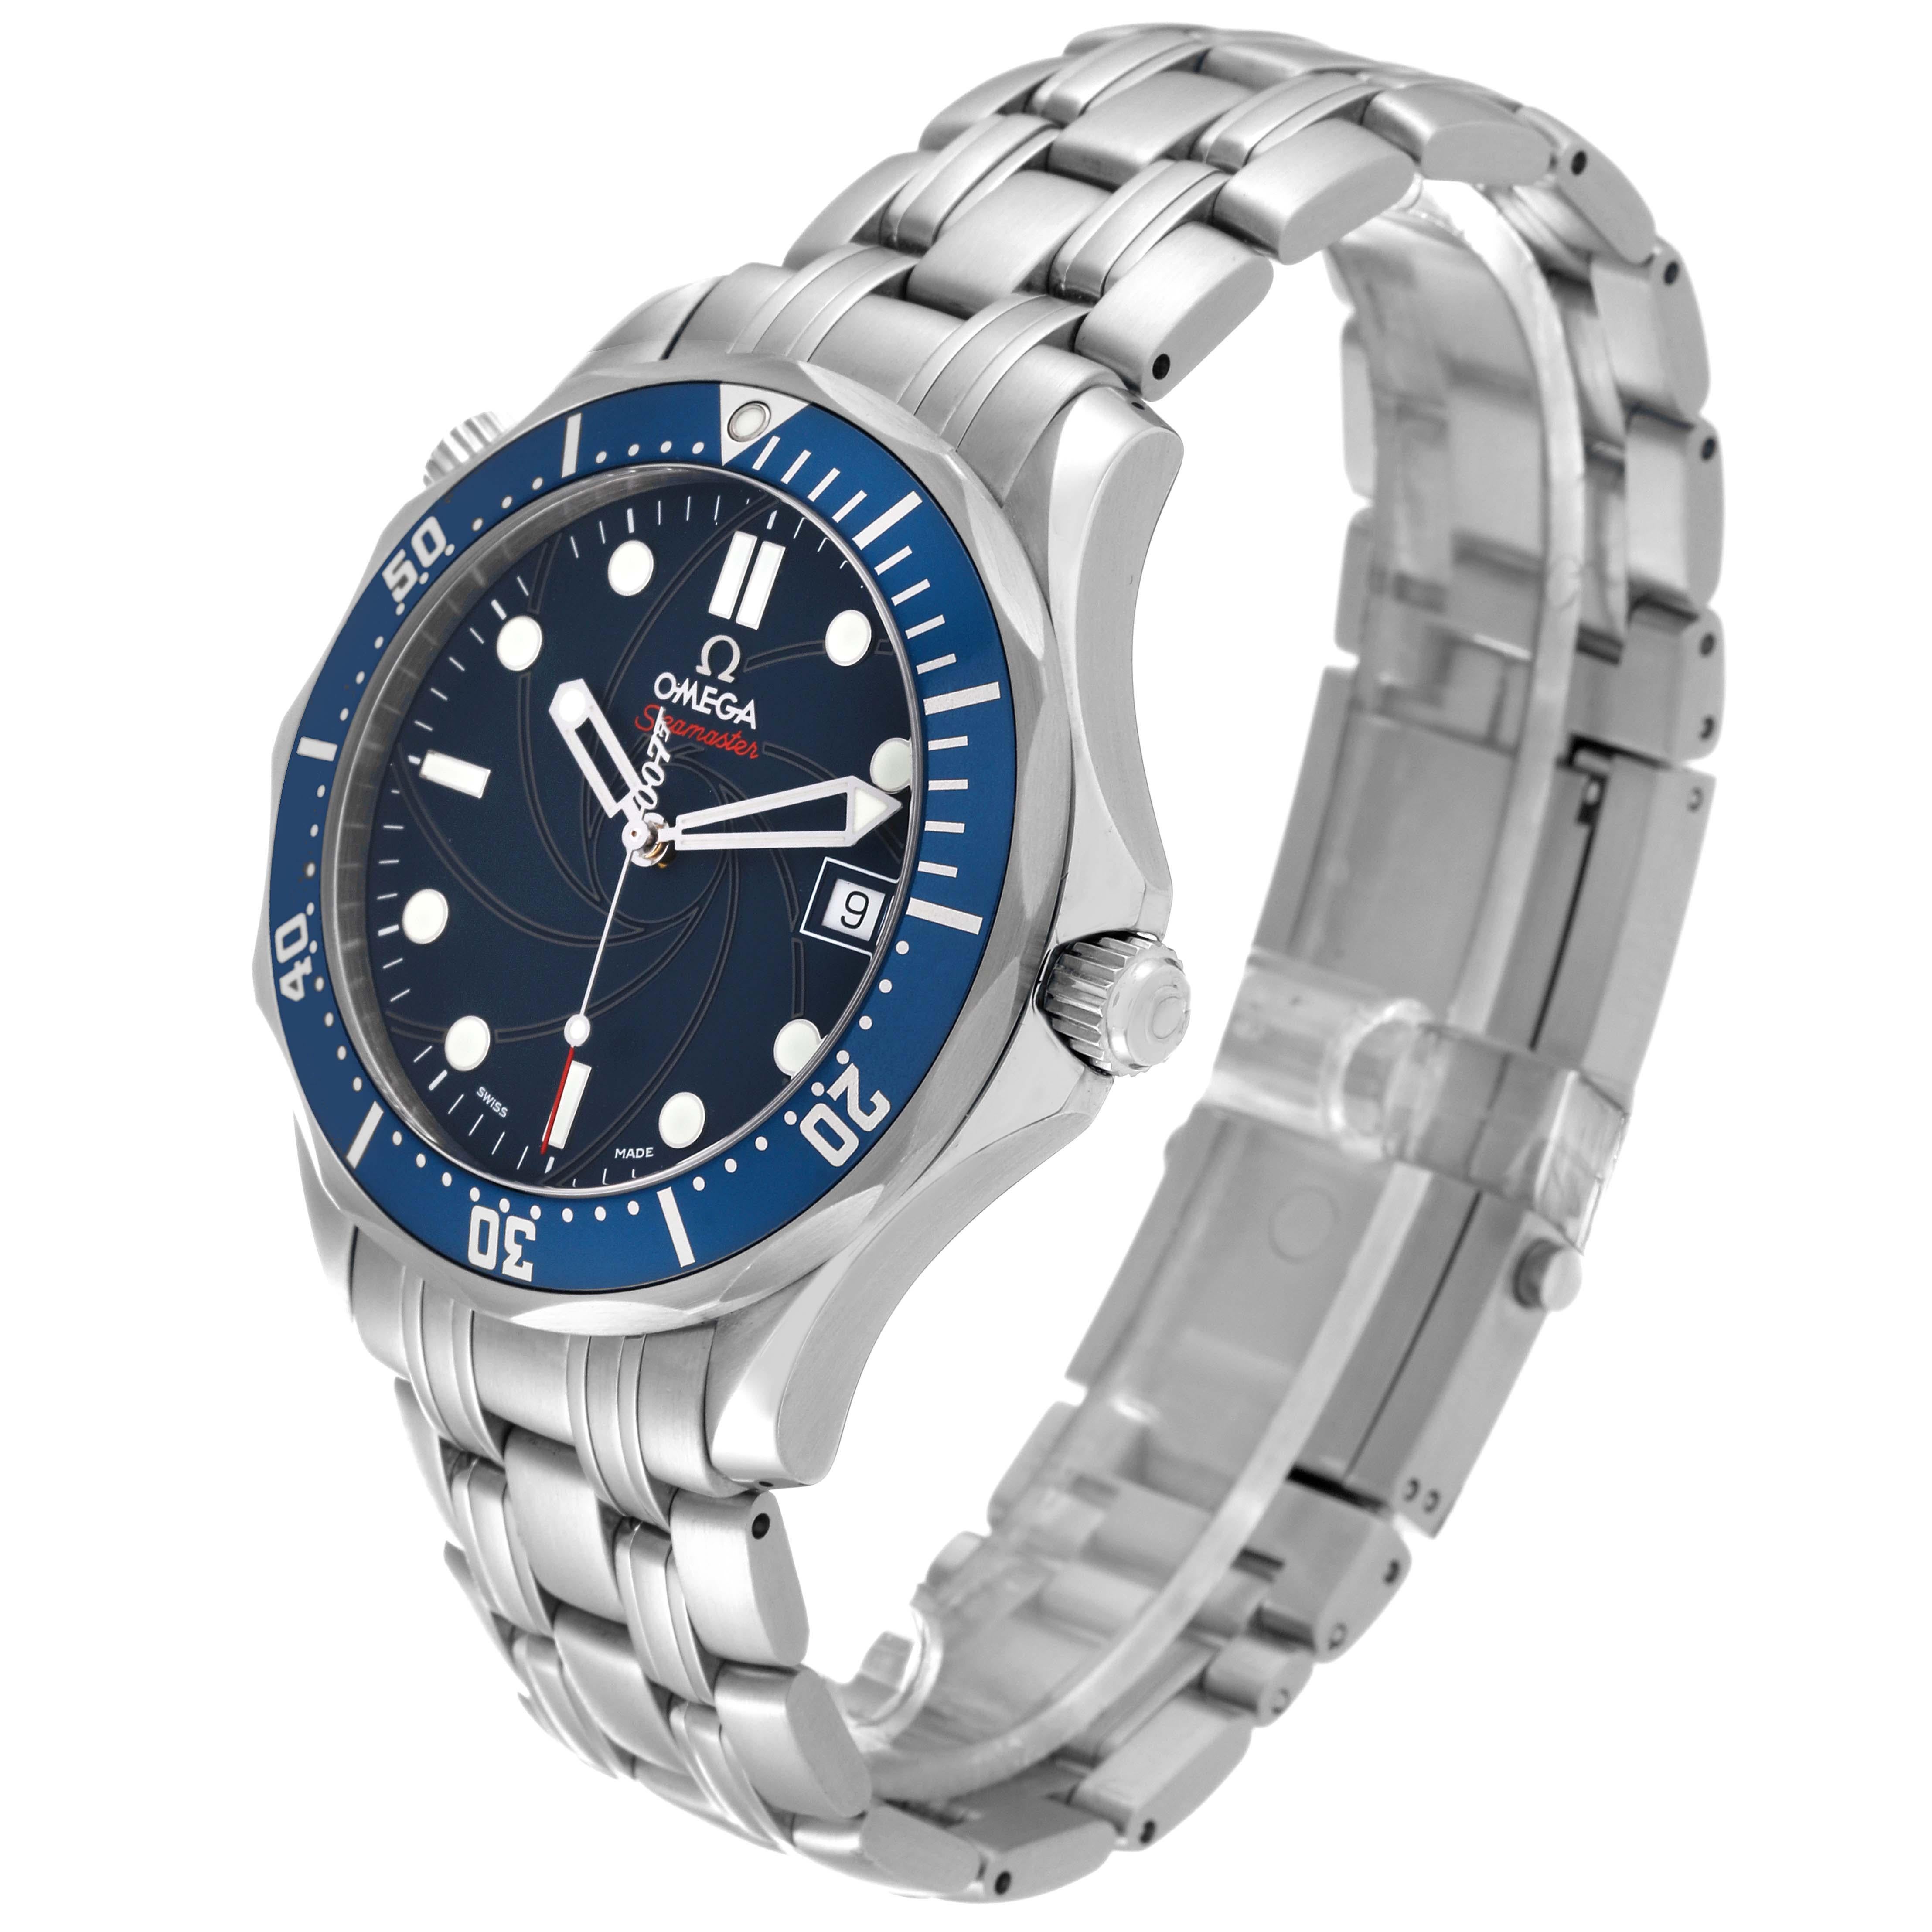 Omega Seamaster Bond 007 Limited Edition Steel Mens Watch 2226.80.00 Box Card Pour hommes en vente